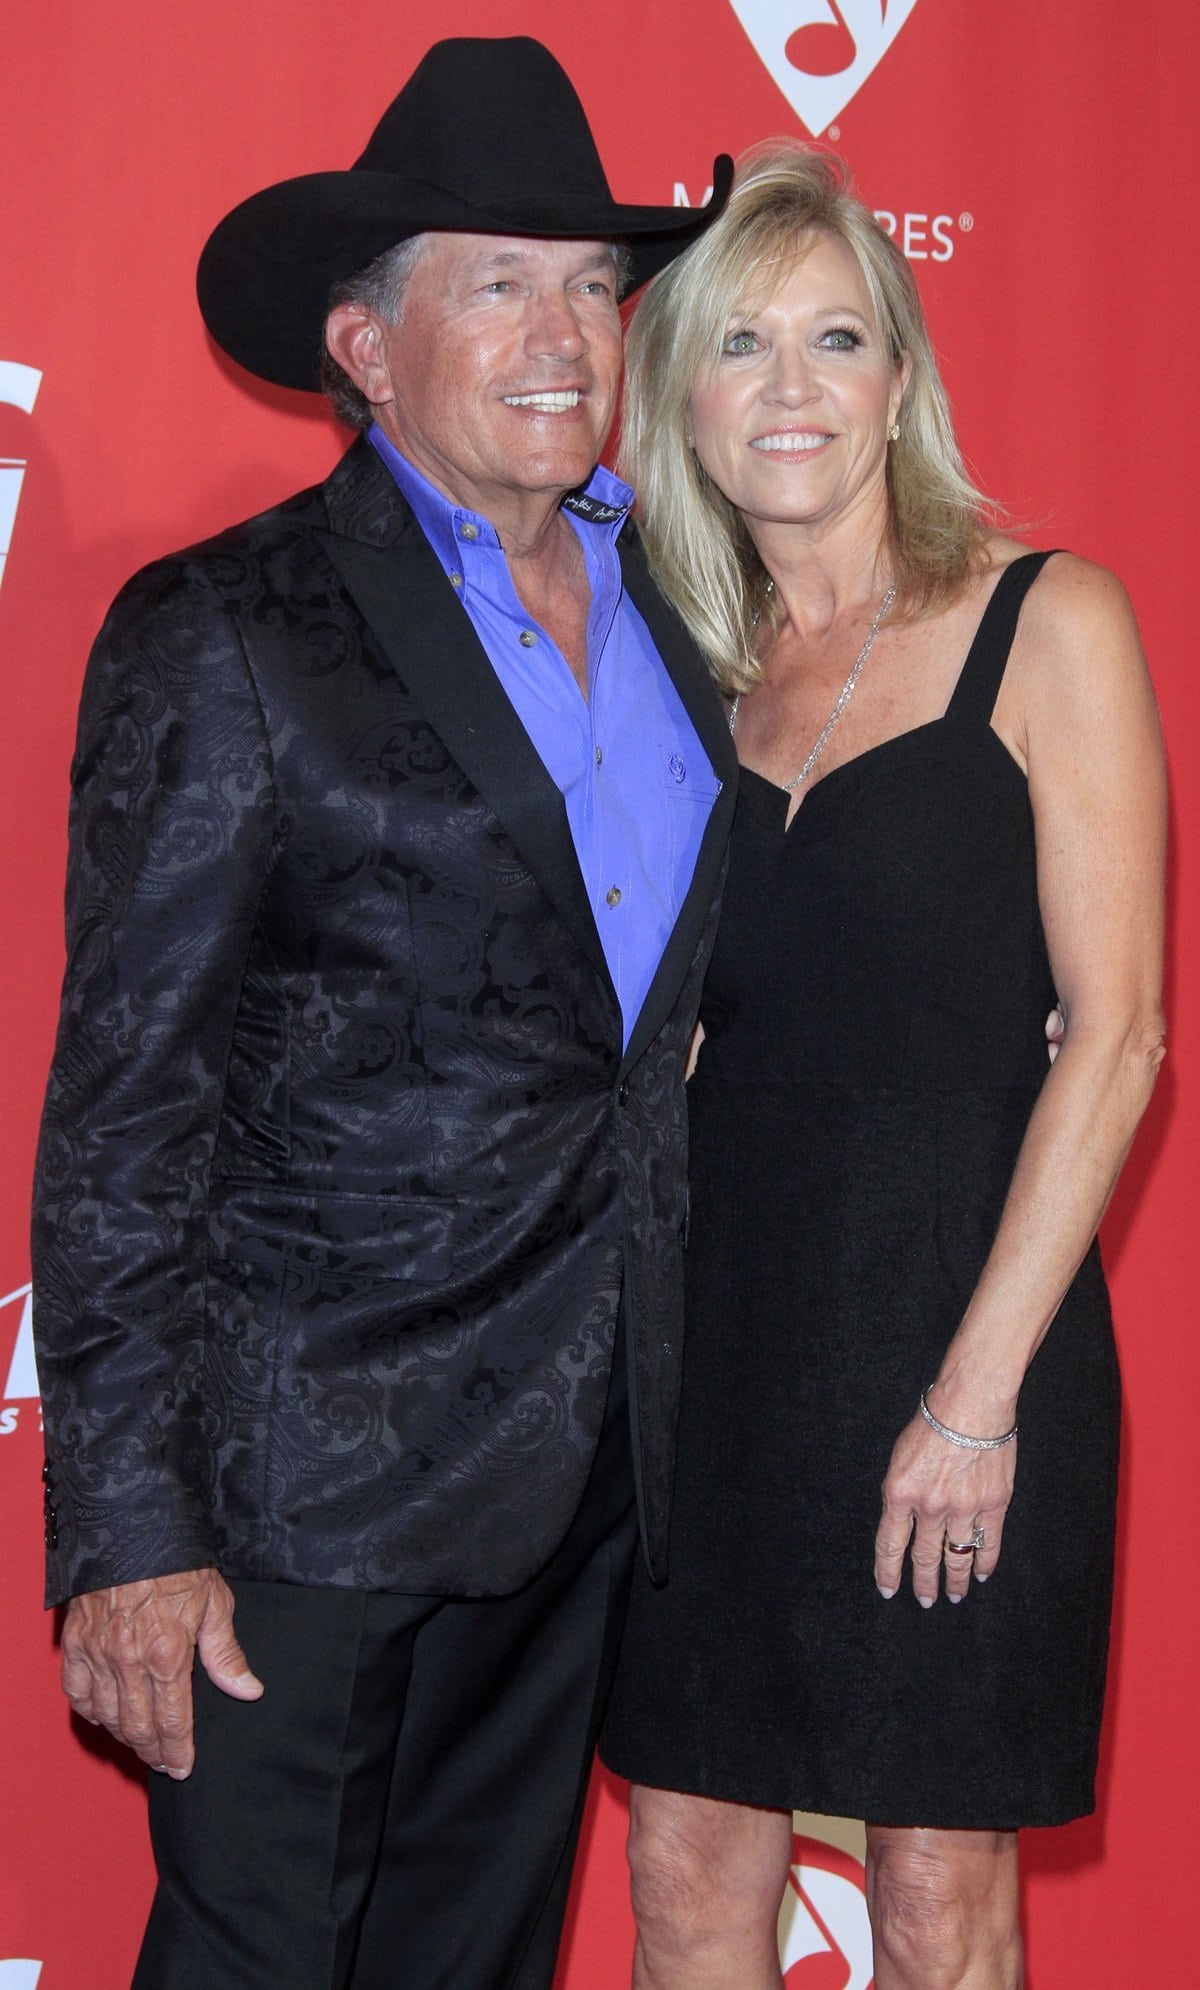 George Strait (L) and his wife Norma Strait attend MusiCares Person of the Year